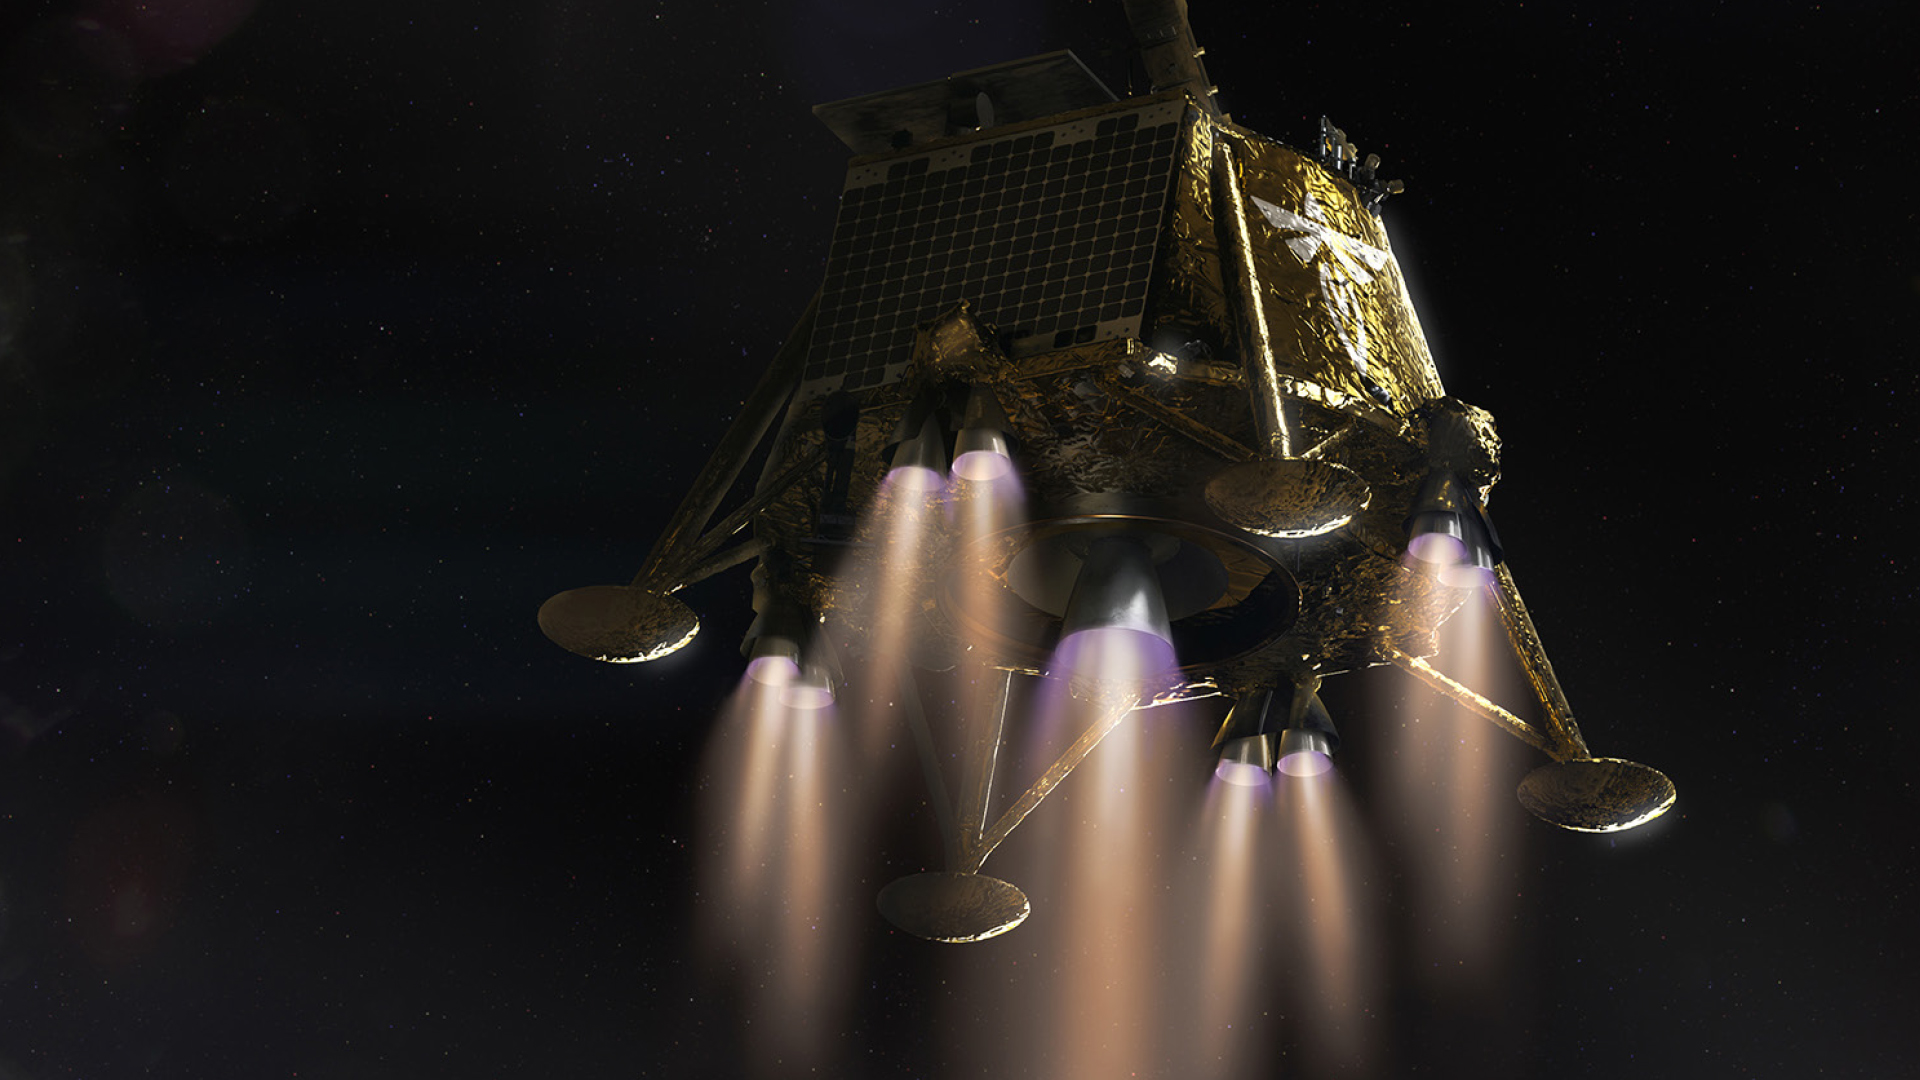 Firefly's Blue Ghost 1 lunar lander will deliver 10 NASA CLPS science payloads to Mare Crisium.